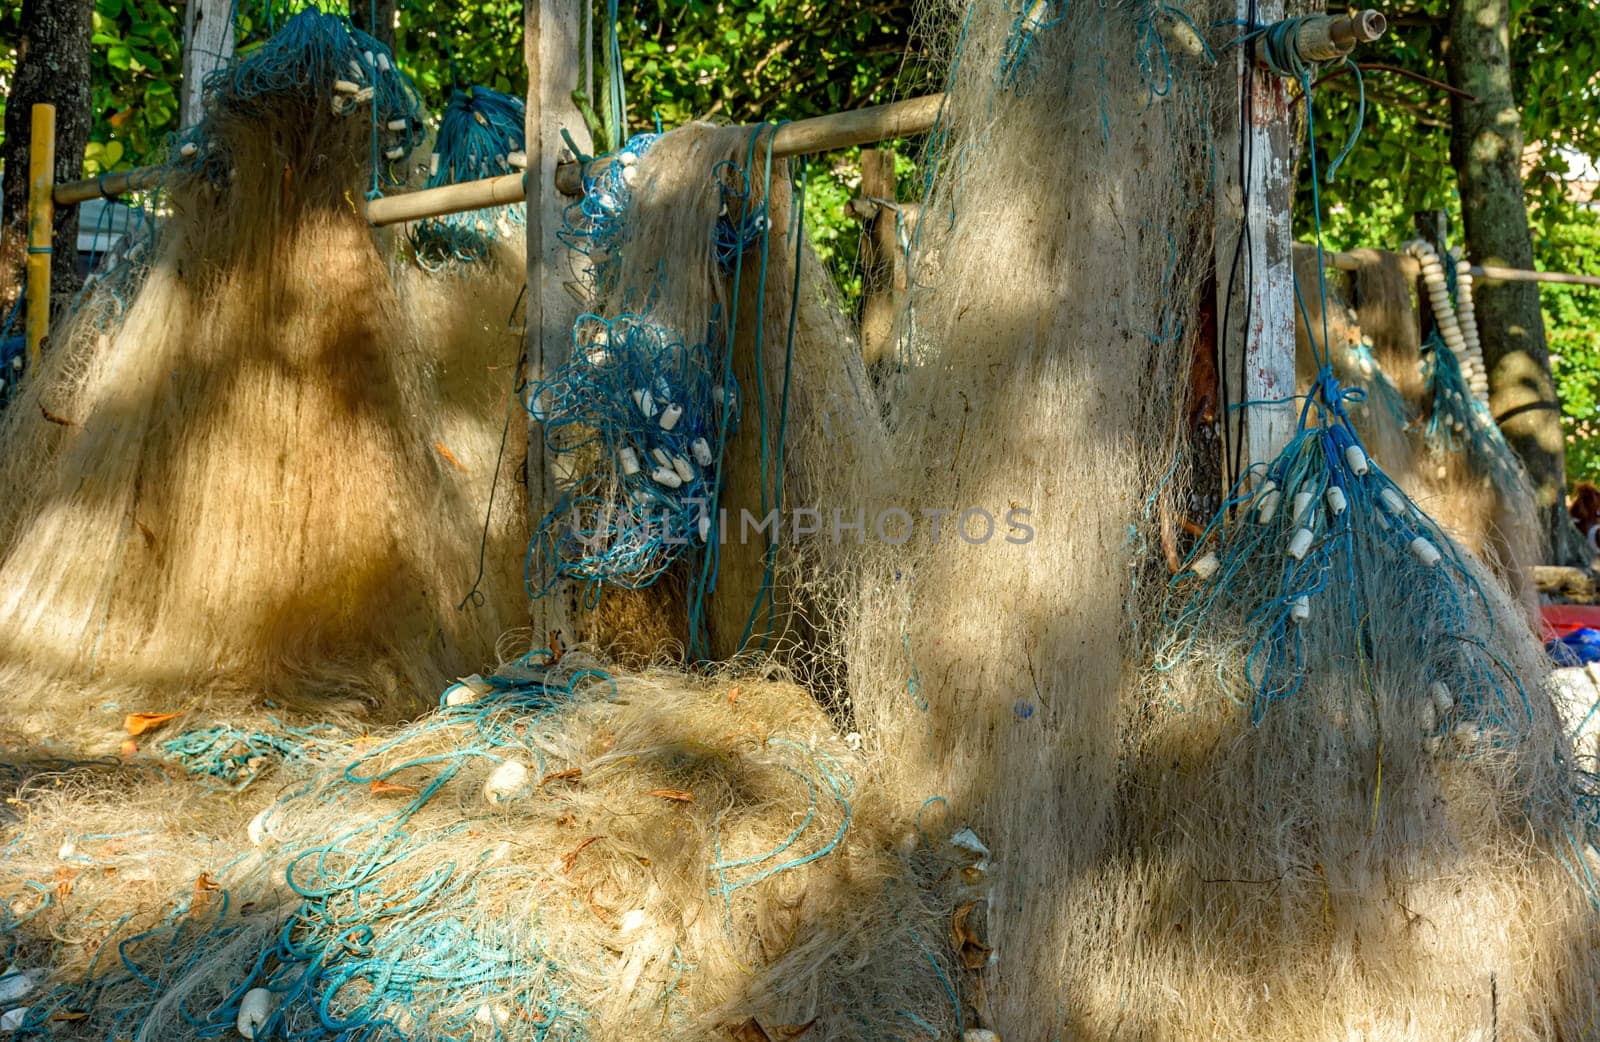 Artisanal fishing nets hung to dry after fishing